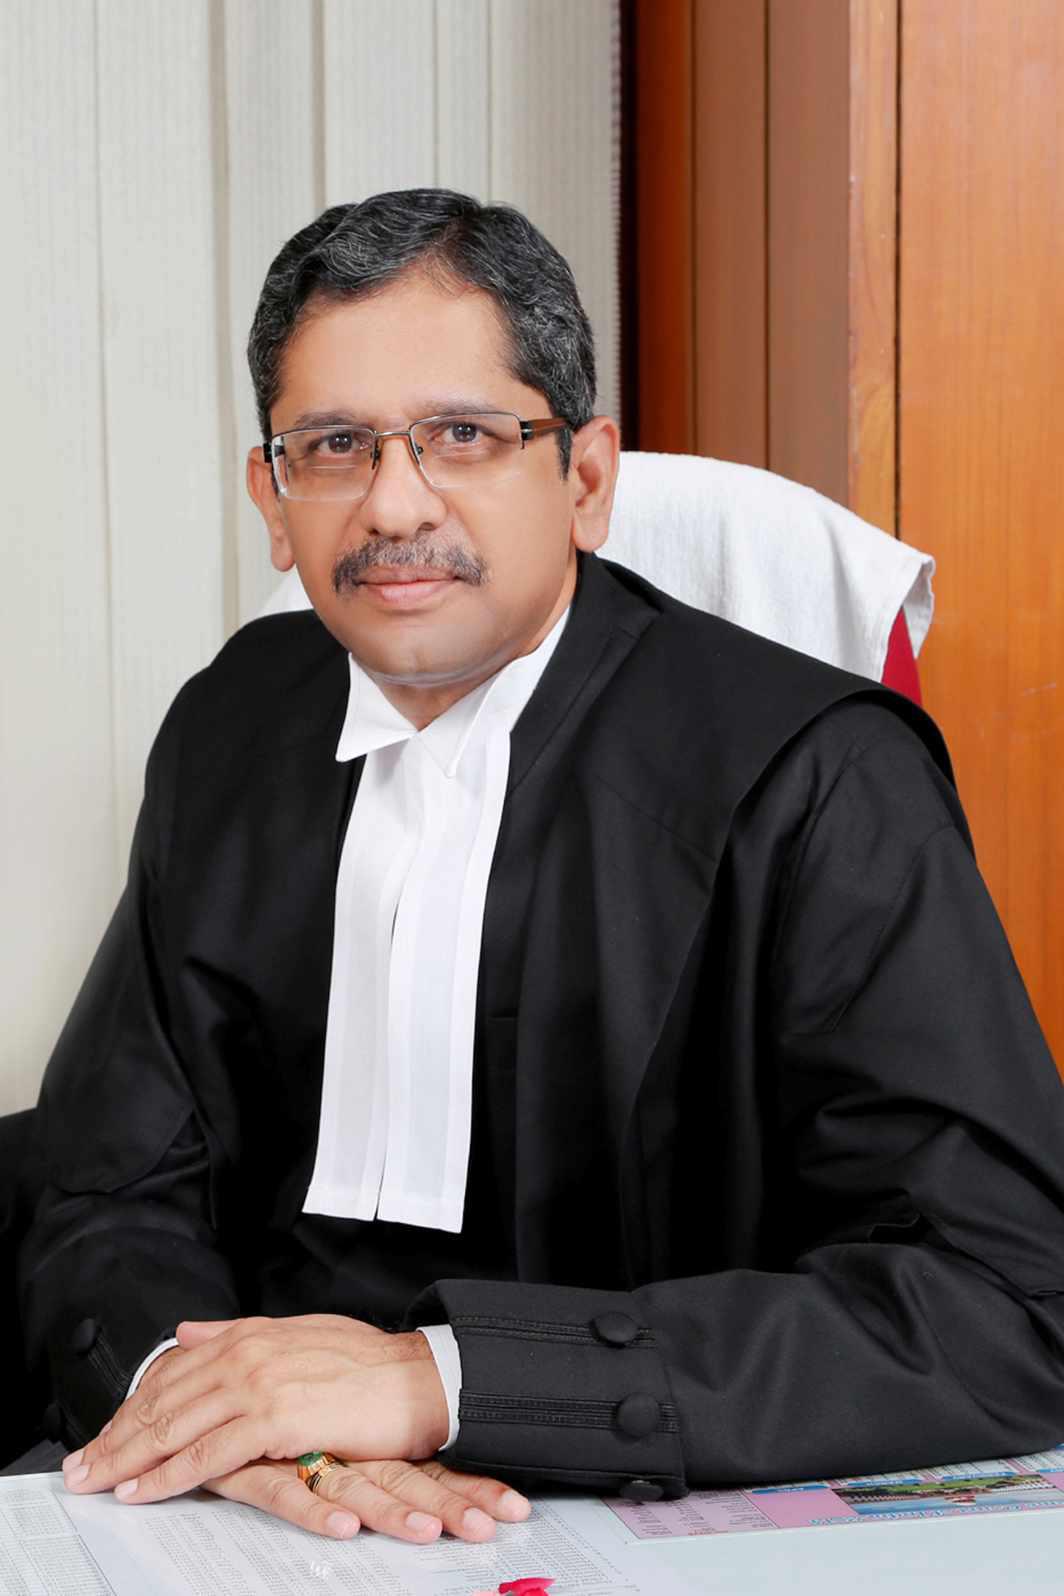 CJI NV Ramana: Passing Bill without debate to reverse verdict on tribunals ‘serious’